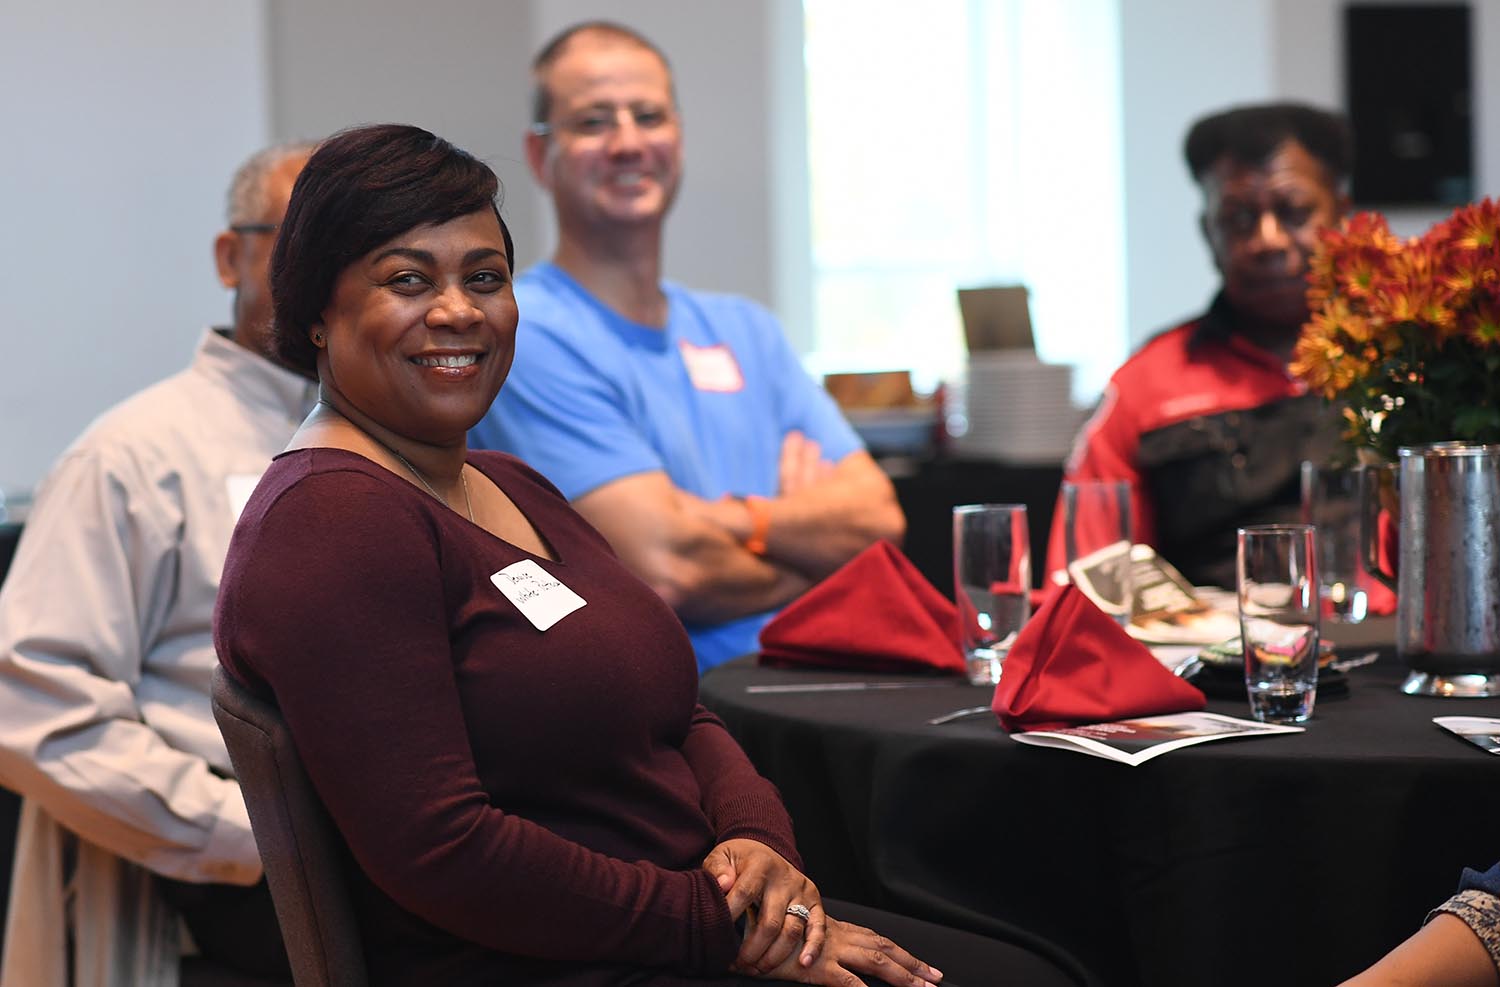 On Nov. 2, the Office of Human Resources hosted its annual Service Recognition Luncheon for employees who have worked at Wesleyan for 20, 25, 30, 35, and 40 or more years. 